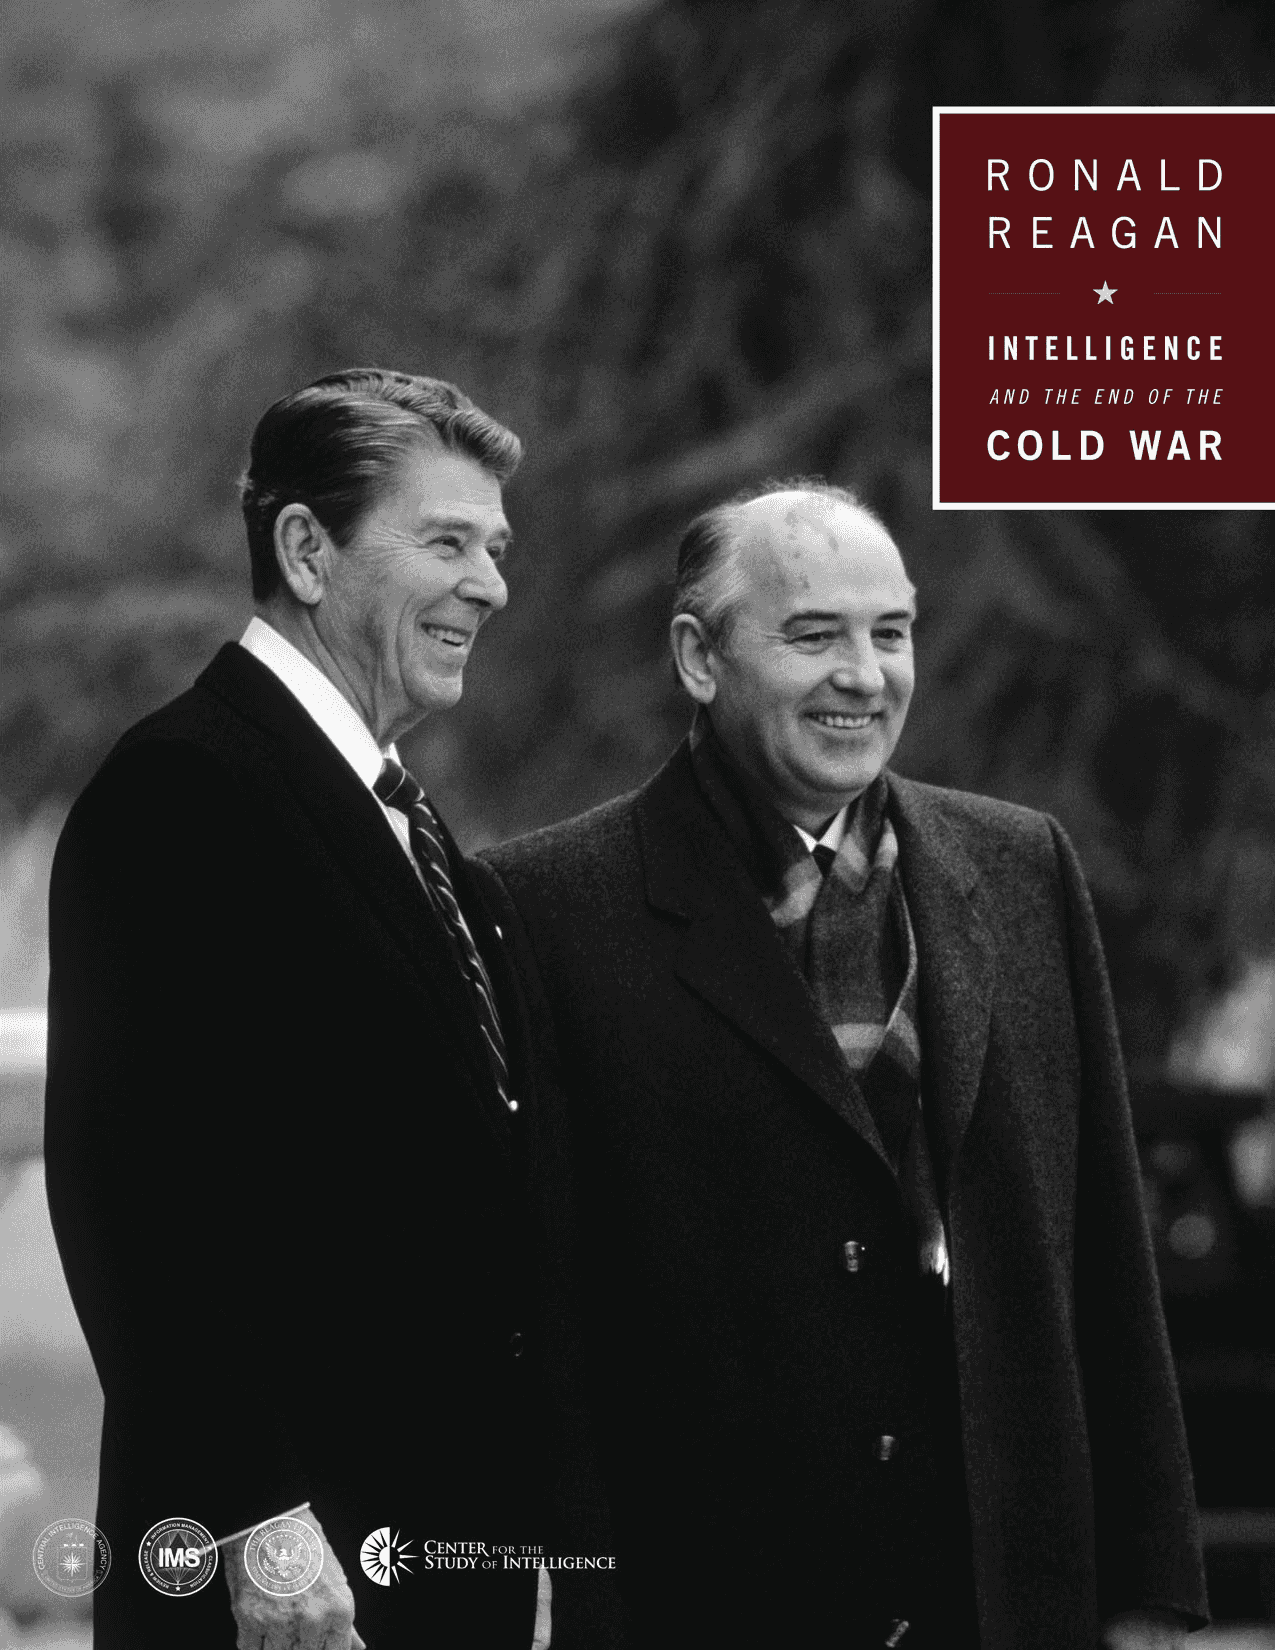 Cover page for the document Ronald Reagan: Intelligence and the End of the Cold War.